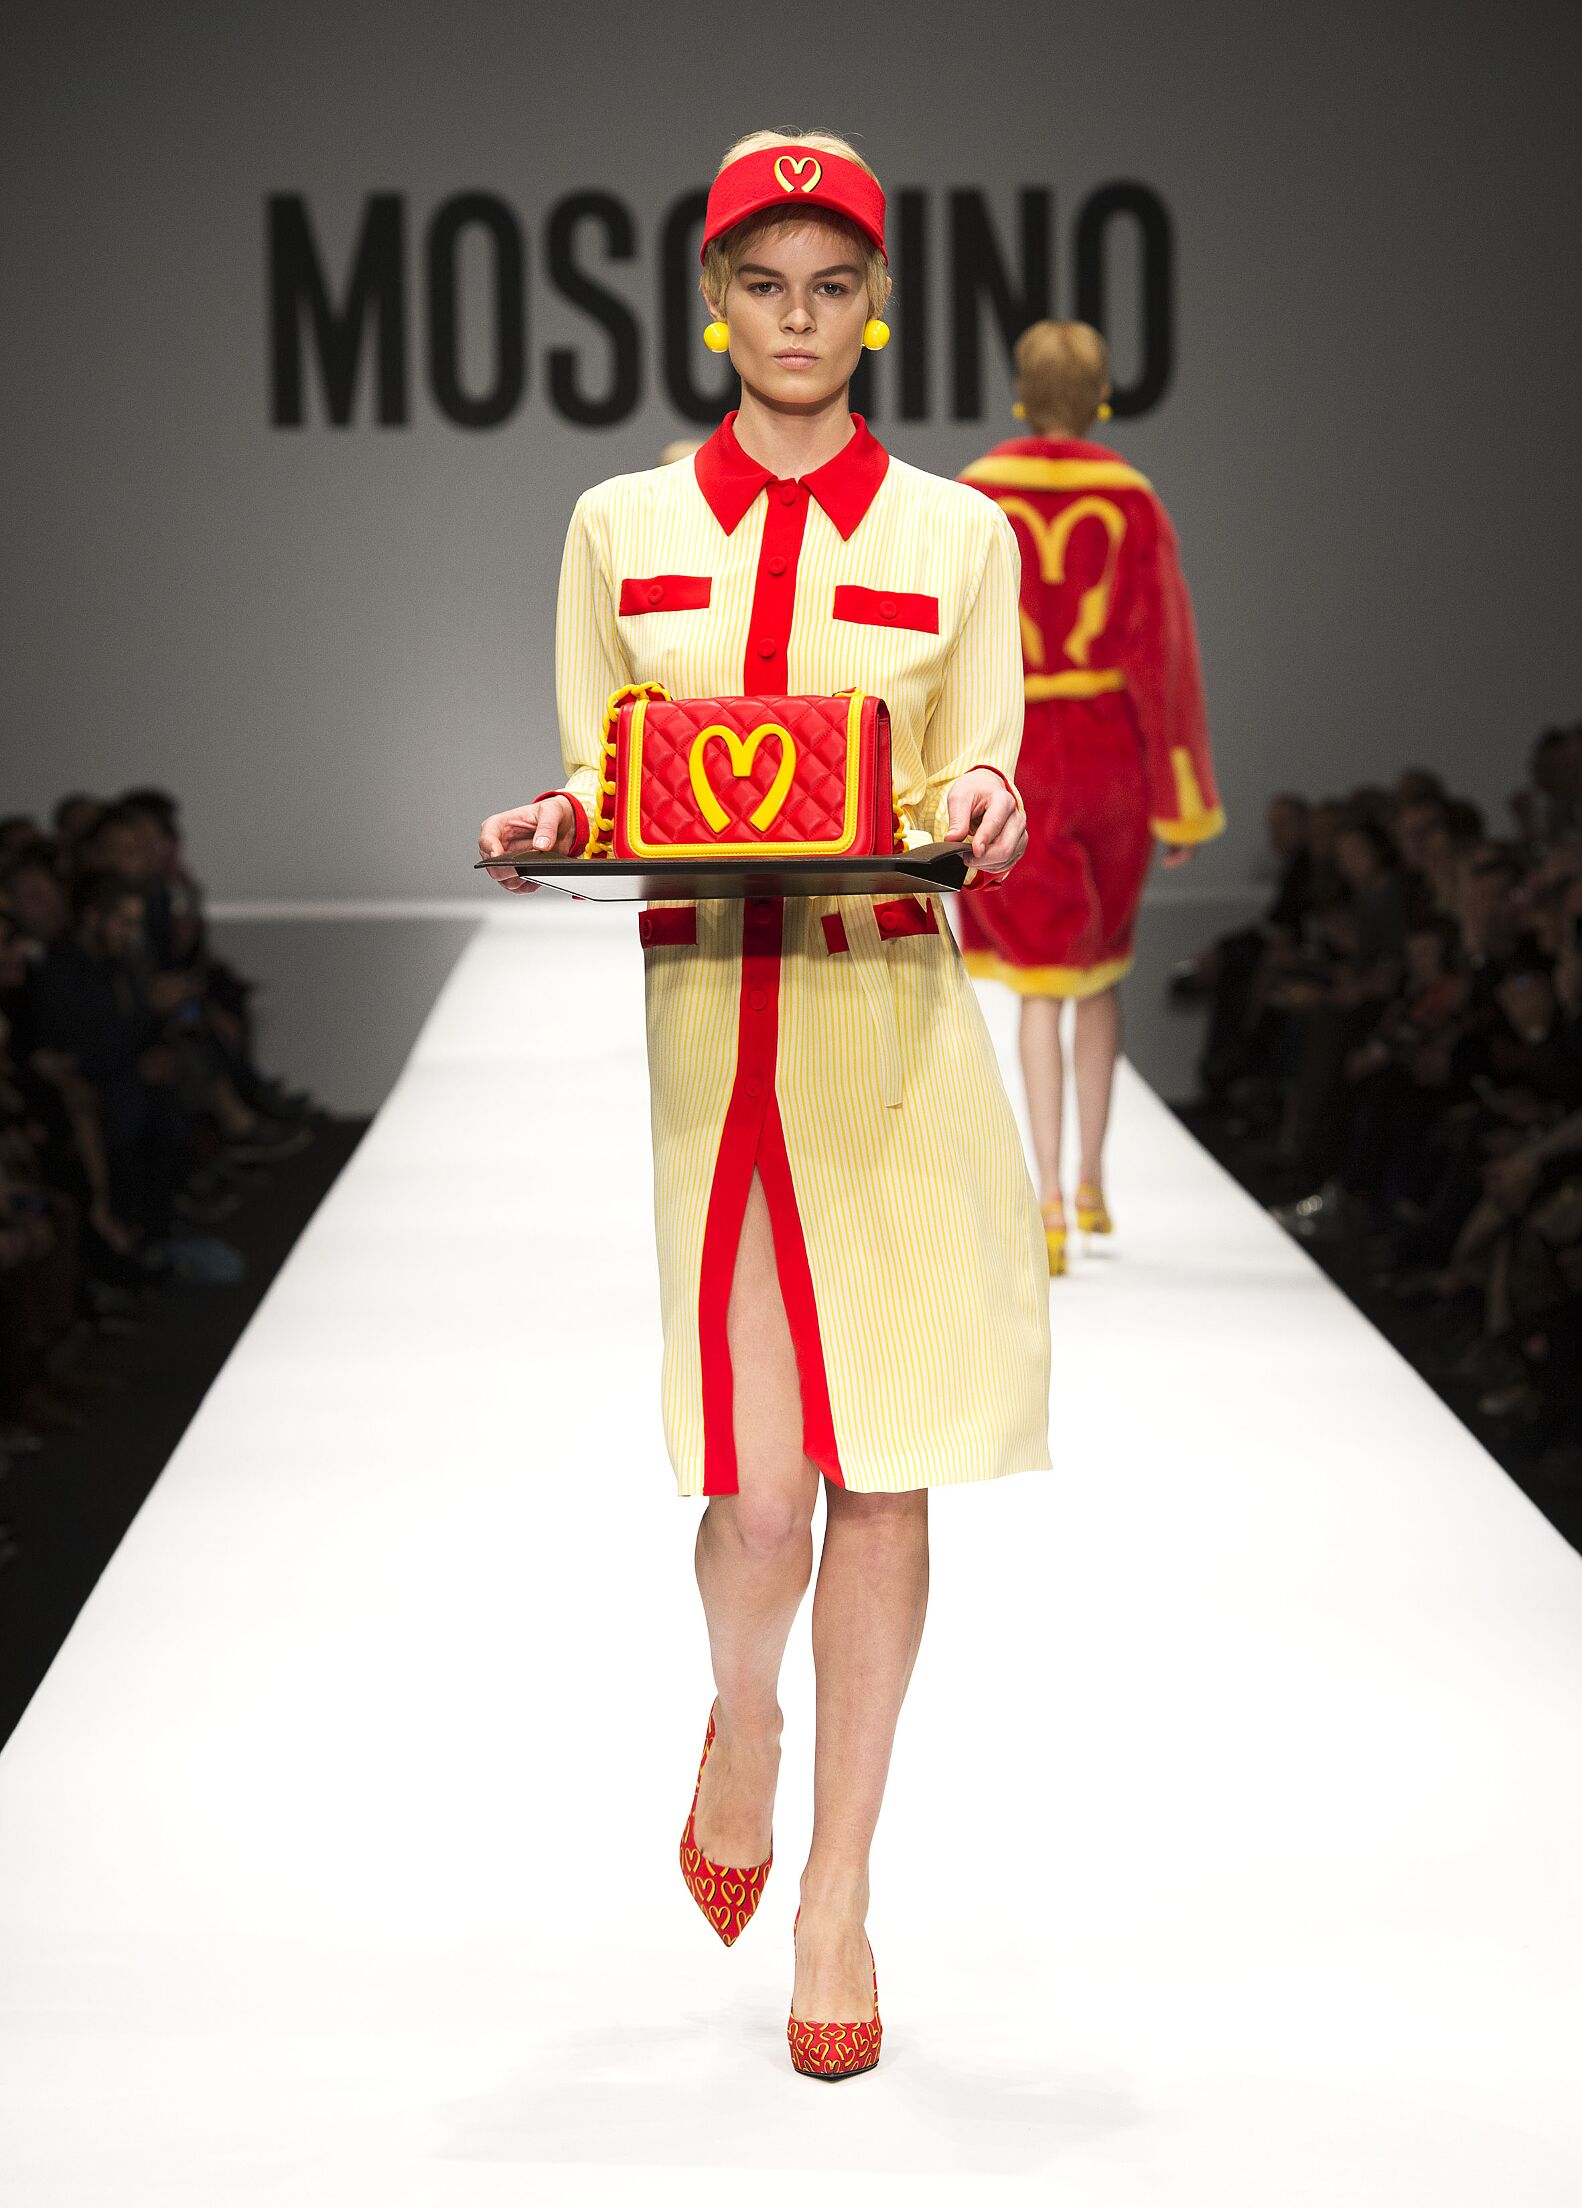 MOSCHINO FALL WINTER 2014-15 WOMEN’S COLLECTION | The Skinny Beep1582 x 2208